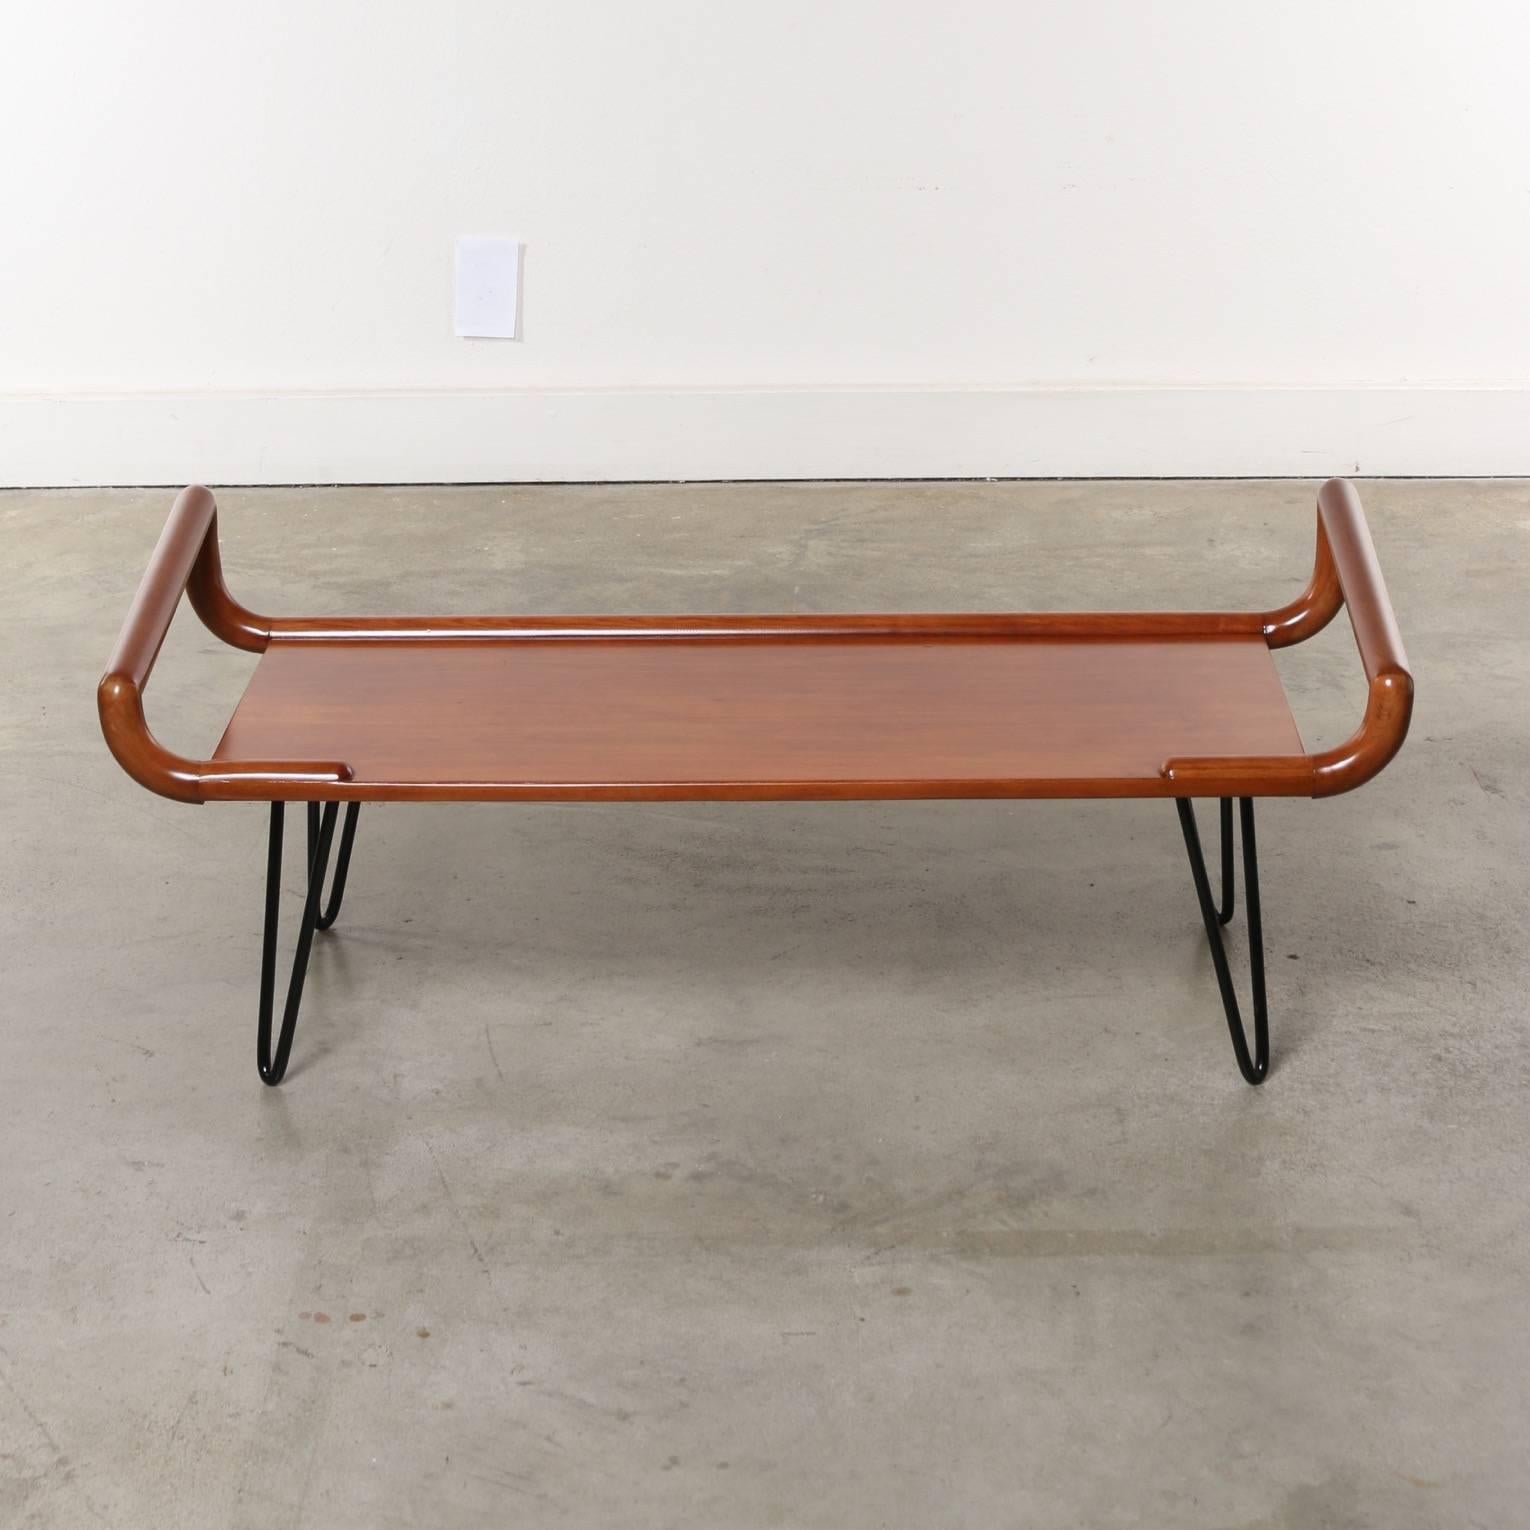 Midcentury Table or Bench with Hairpin Legs 1